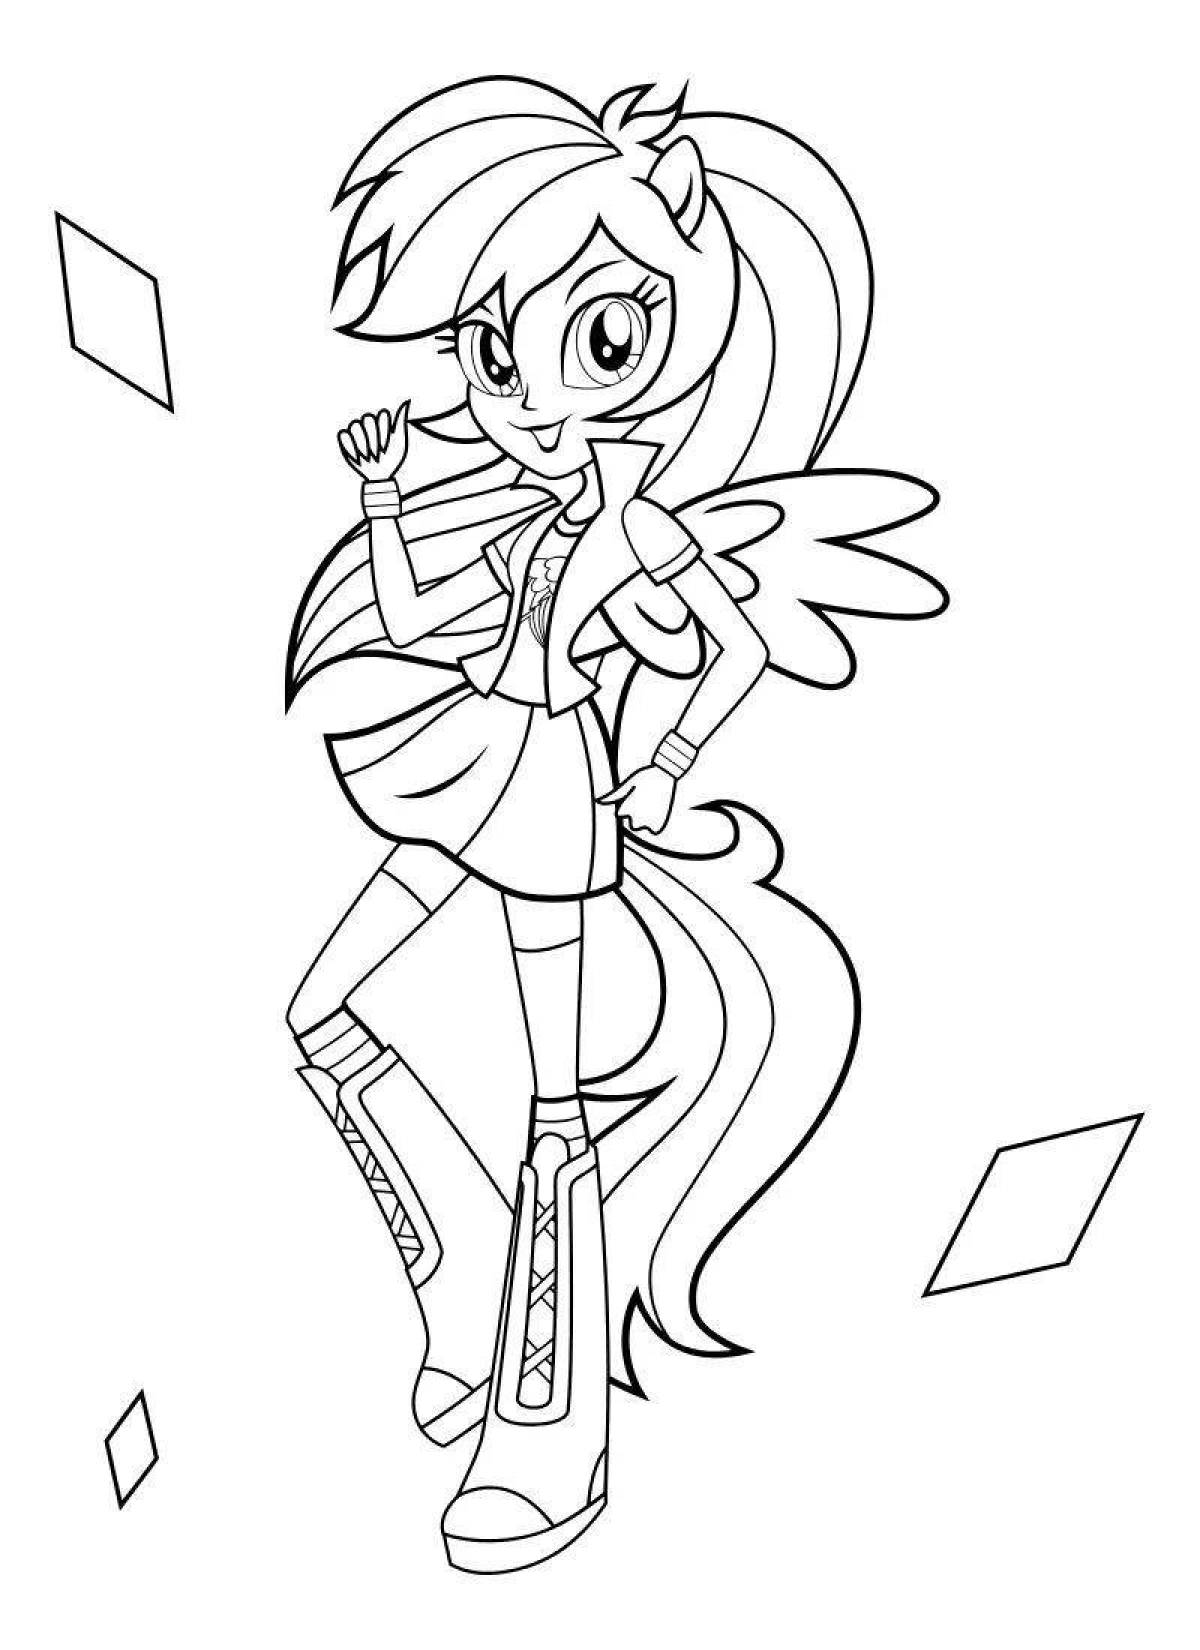 Coloring page bright pony man